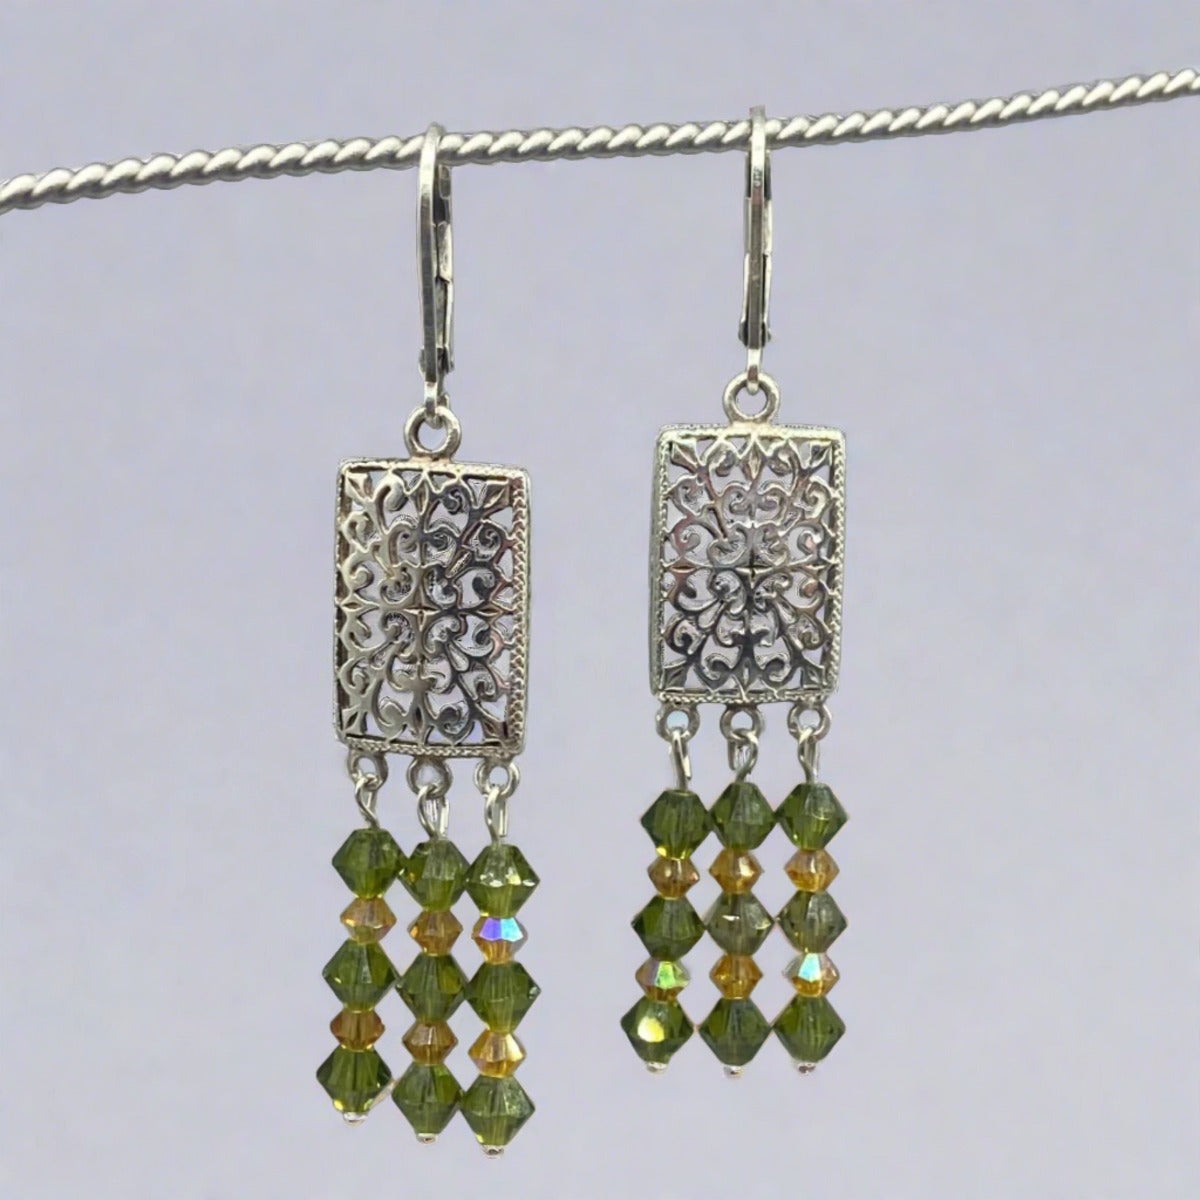 A pair of exquisite Aquatic Flowers Olivine Crystal Chandelier Earrings, featuring shimmering crystals 